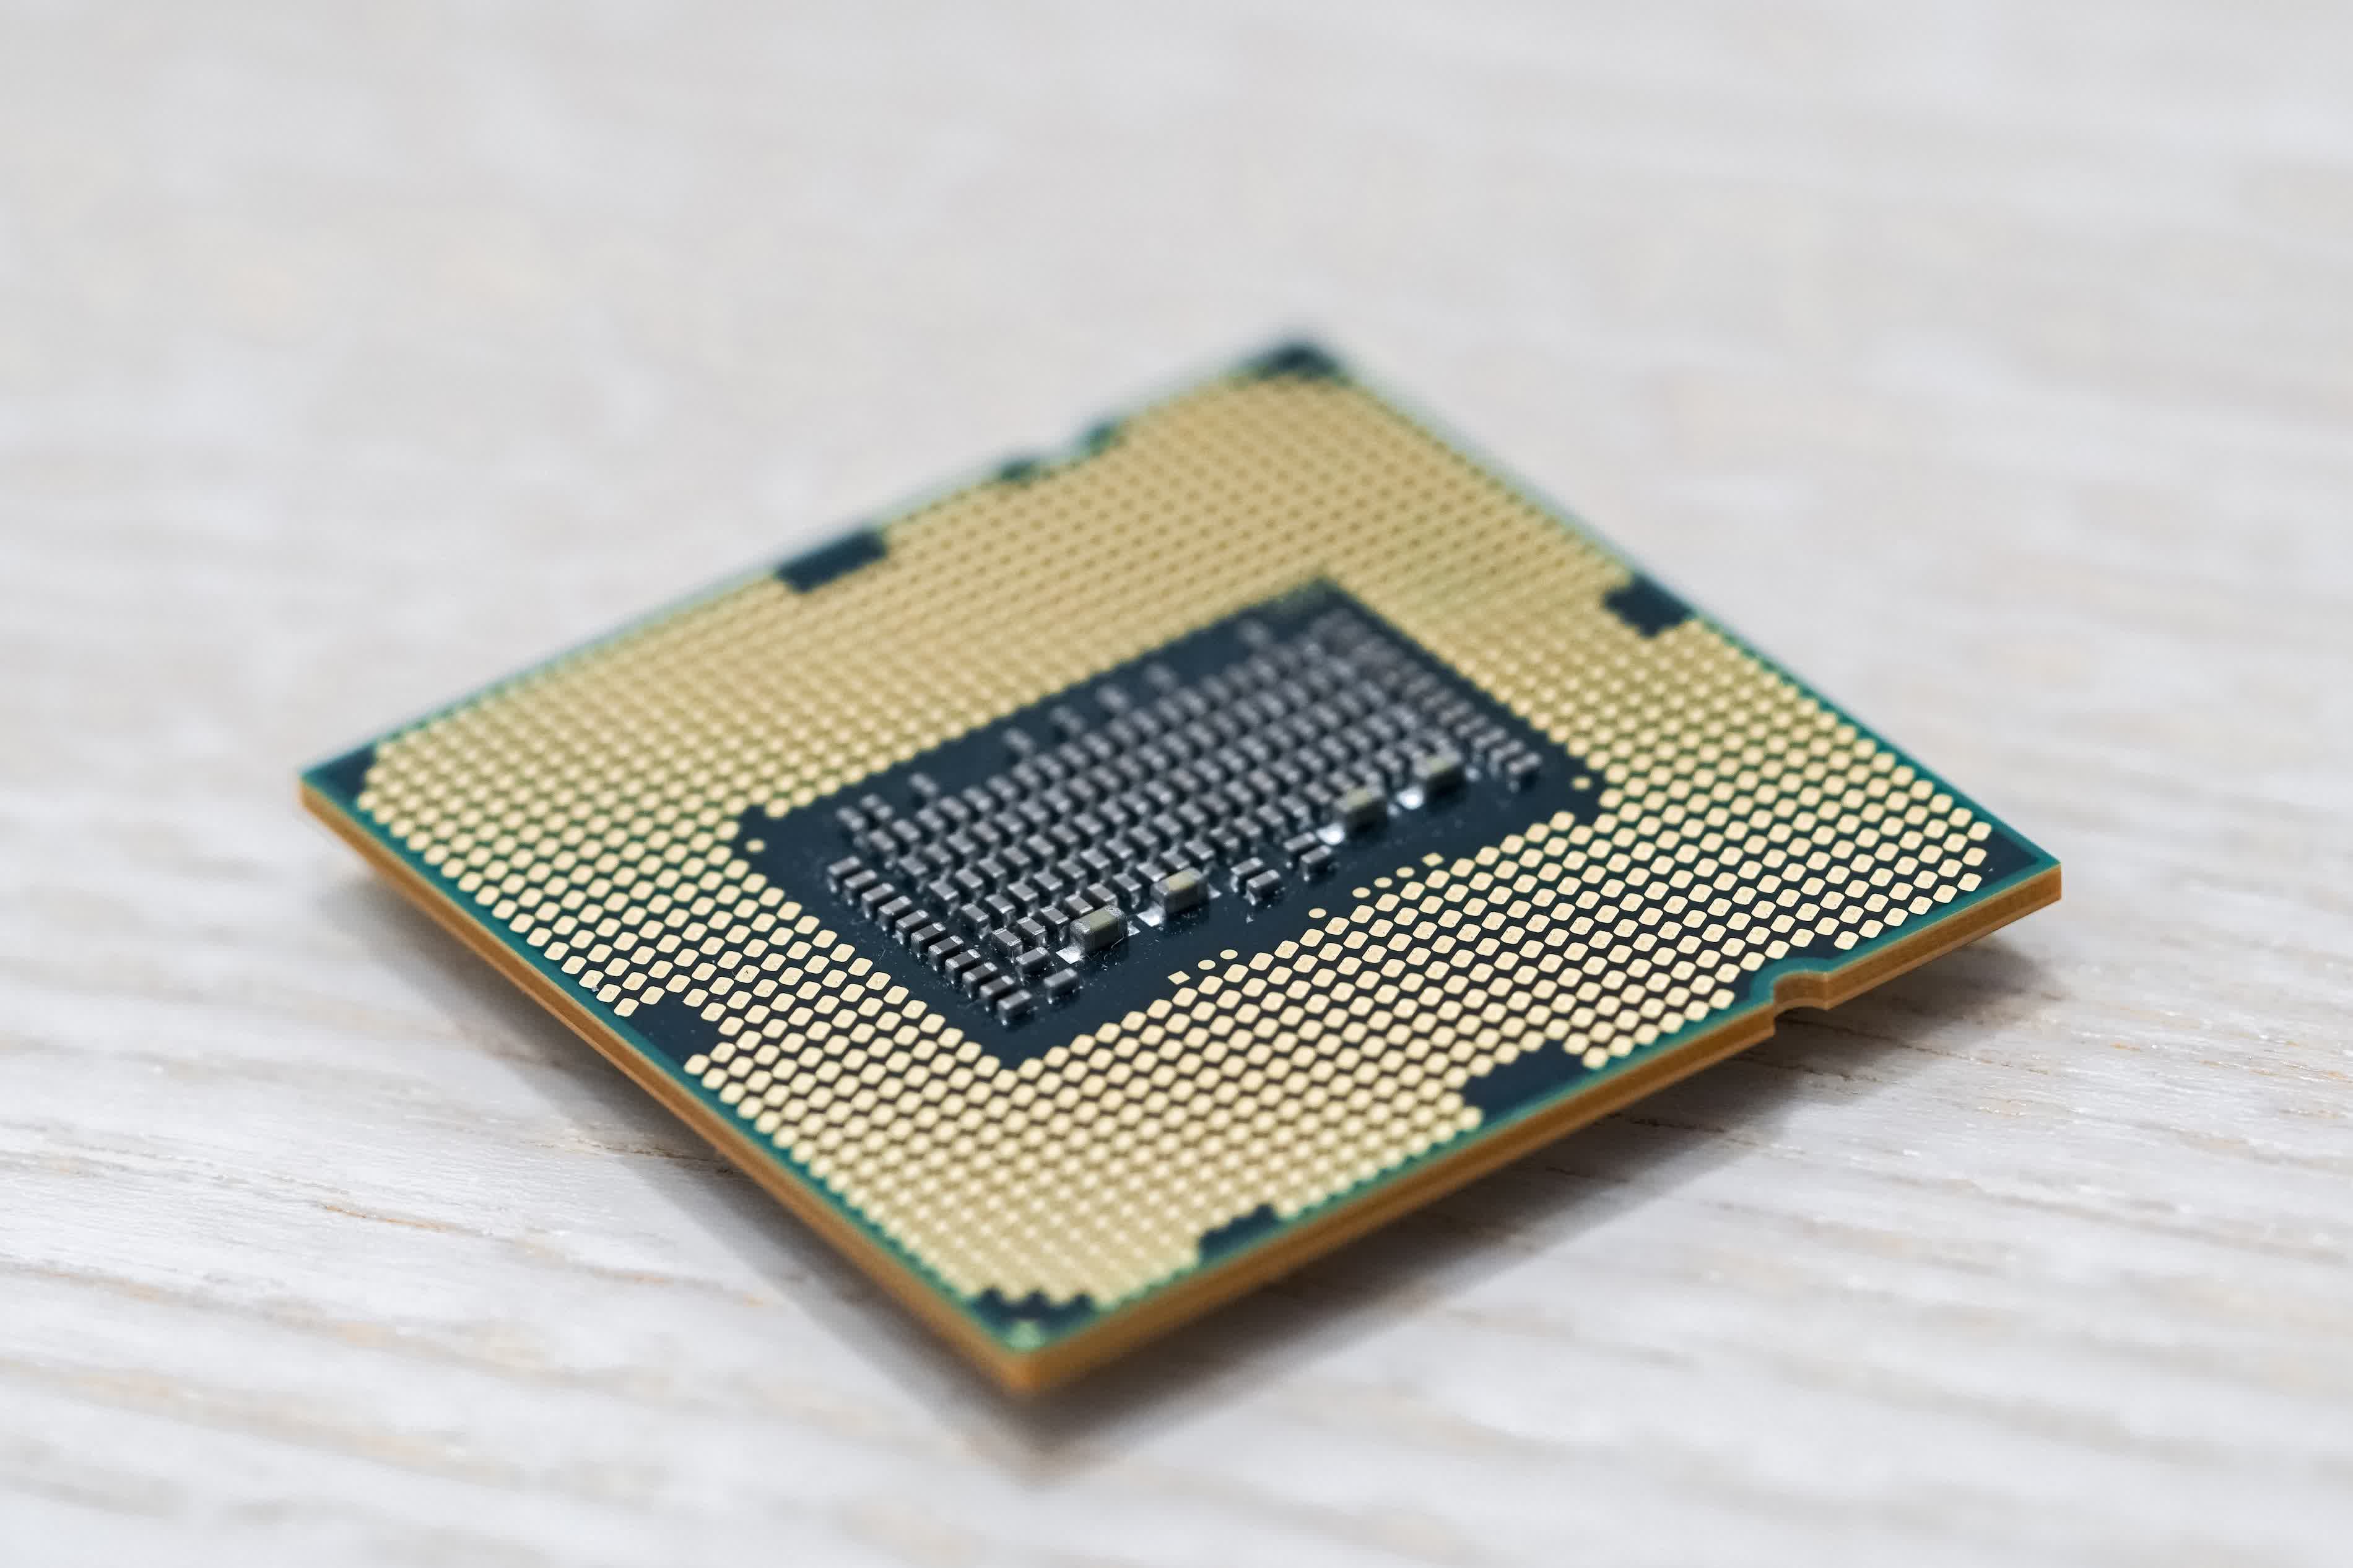 Alleged sample of the upcoming Intel Core i9-13900K processor sells on black market